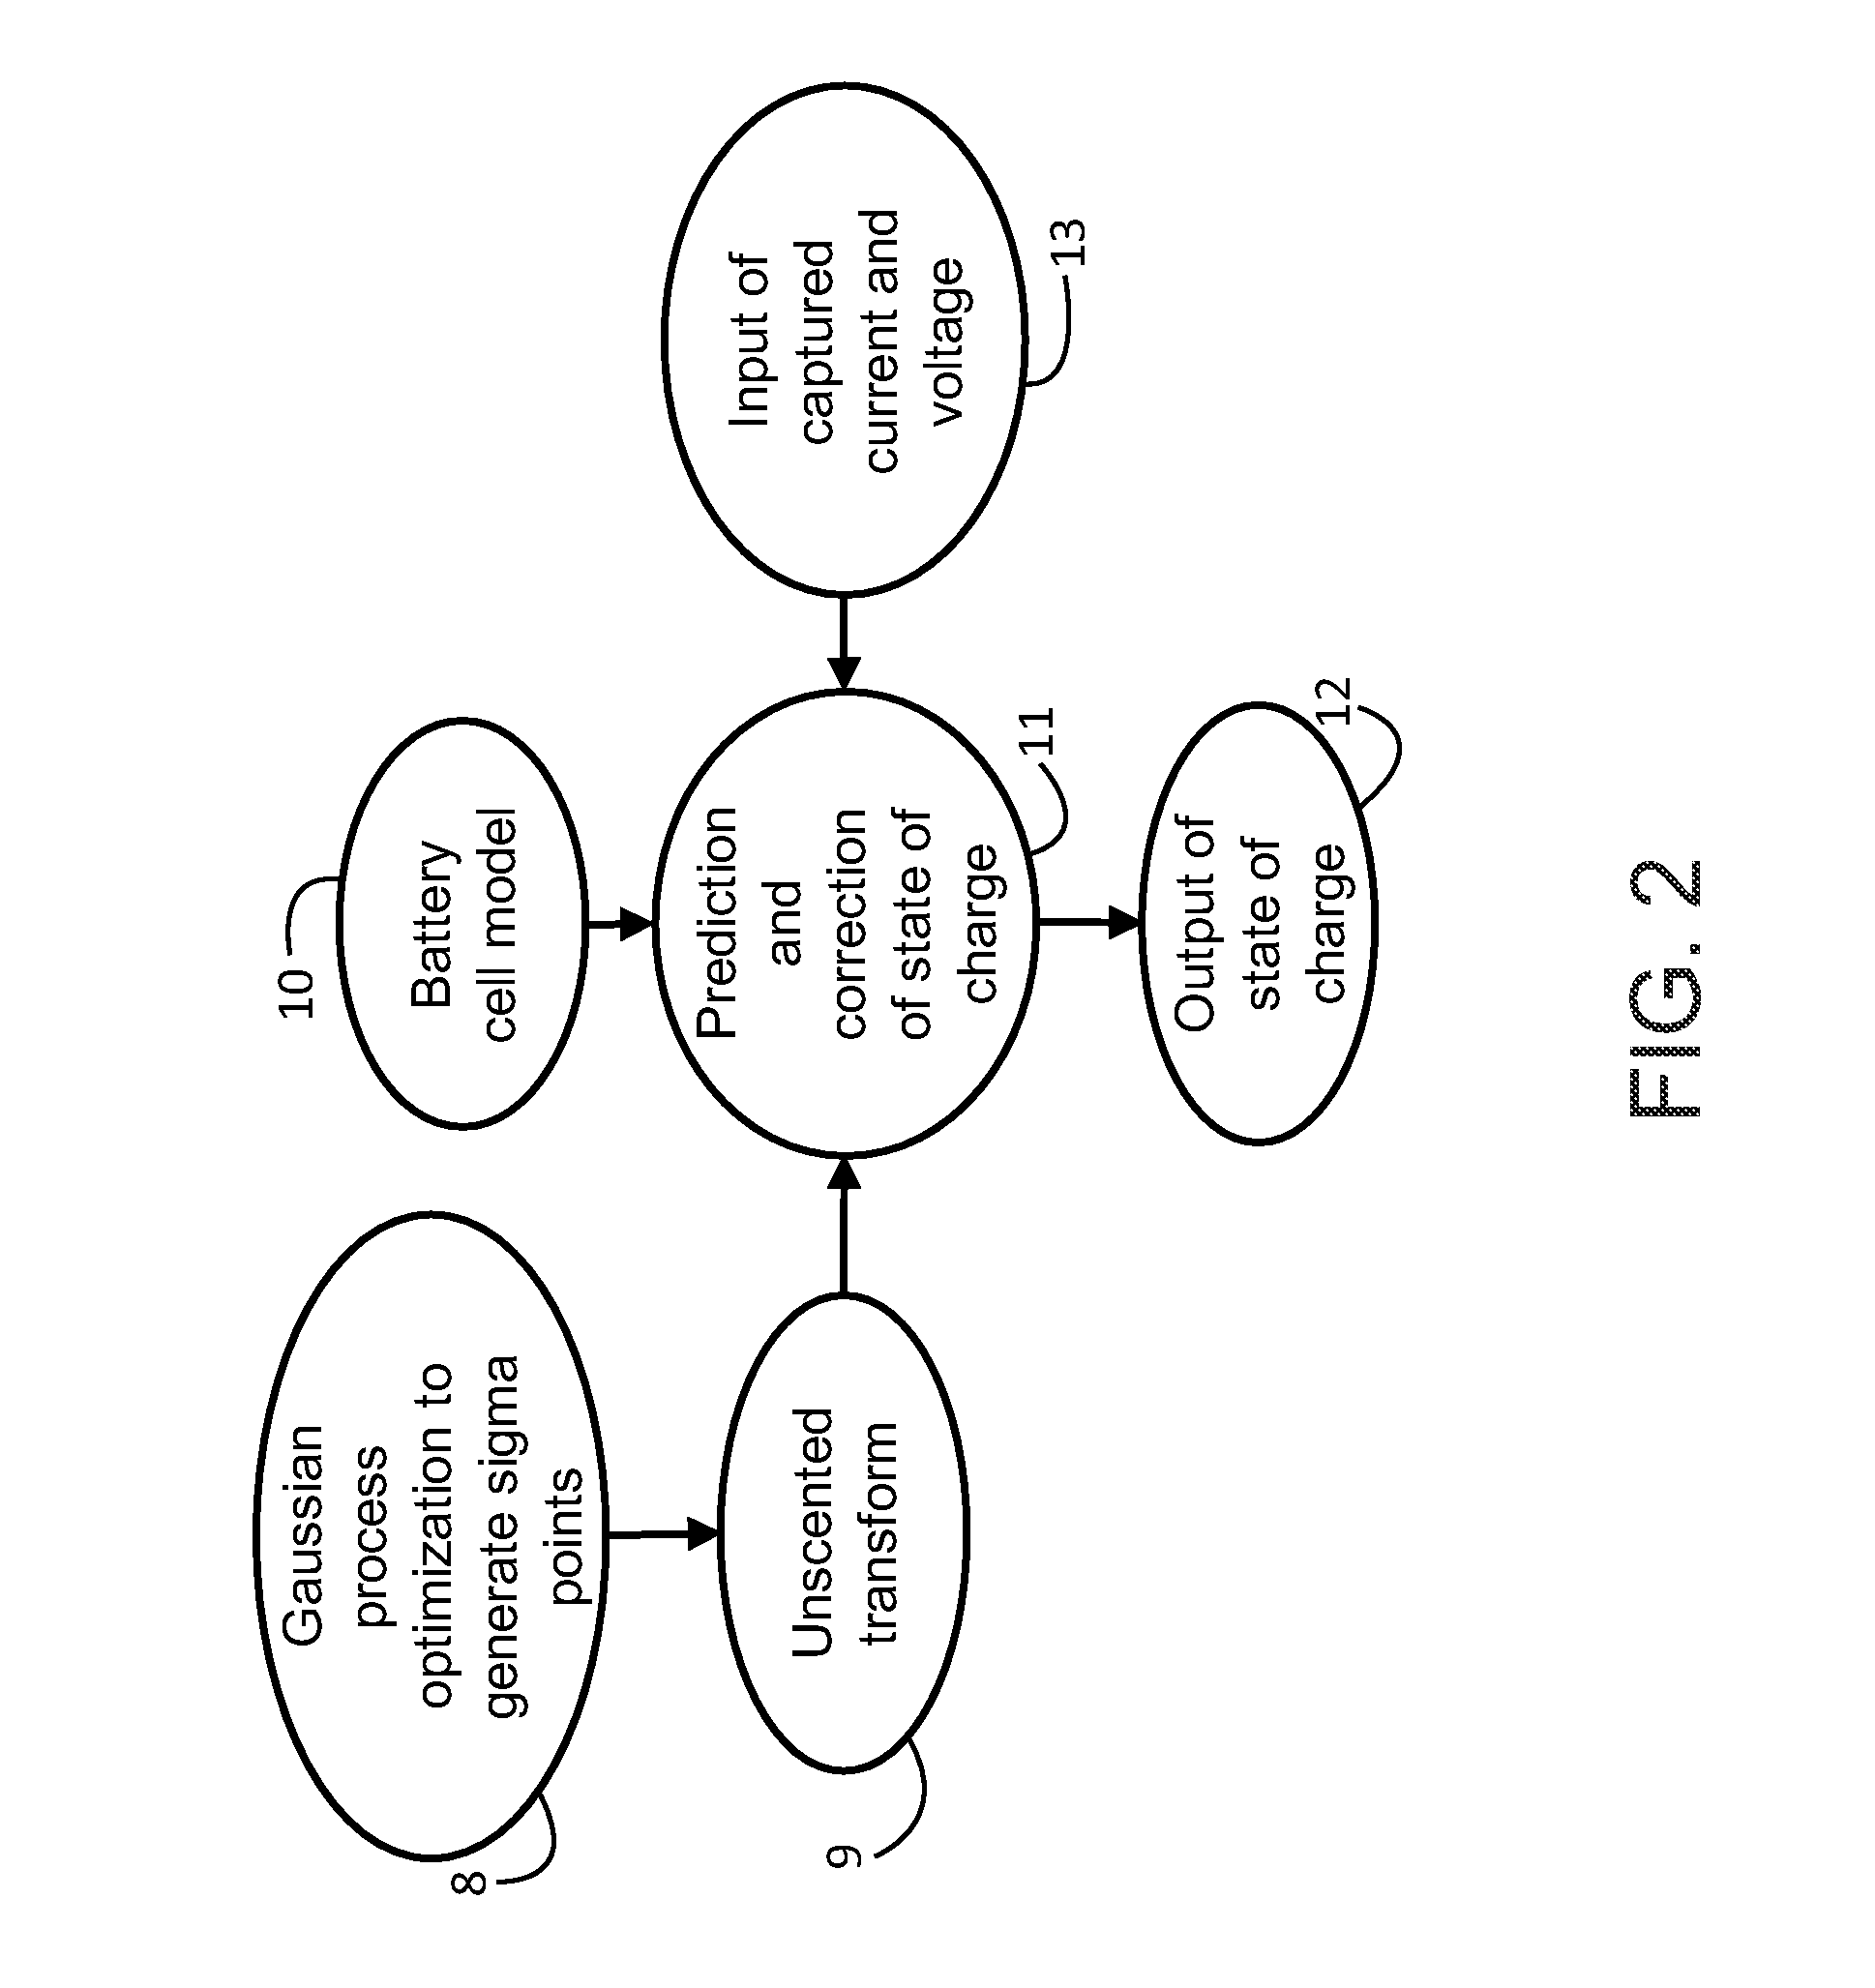 Method and system for operating a battery in a selected application